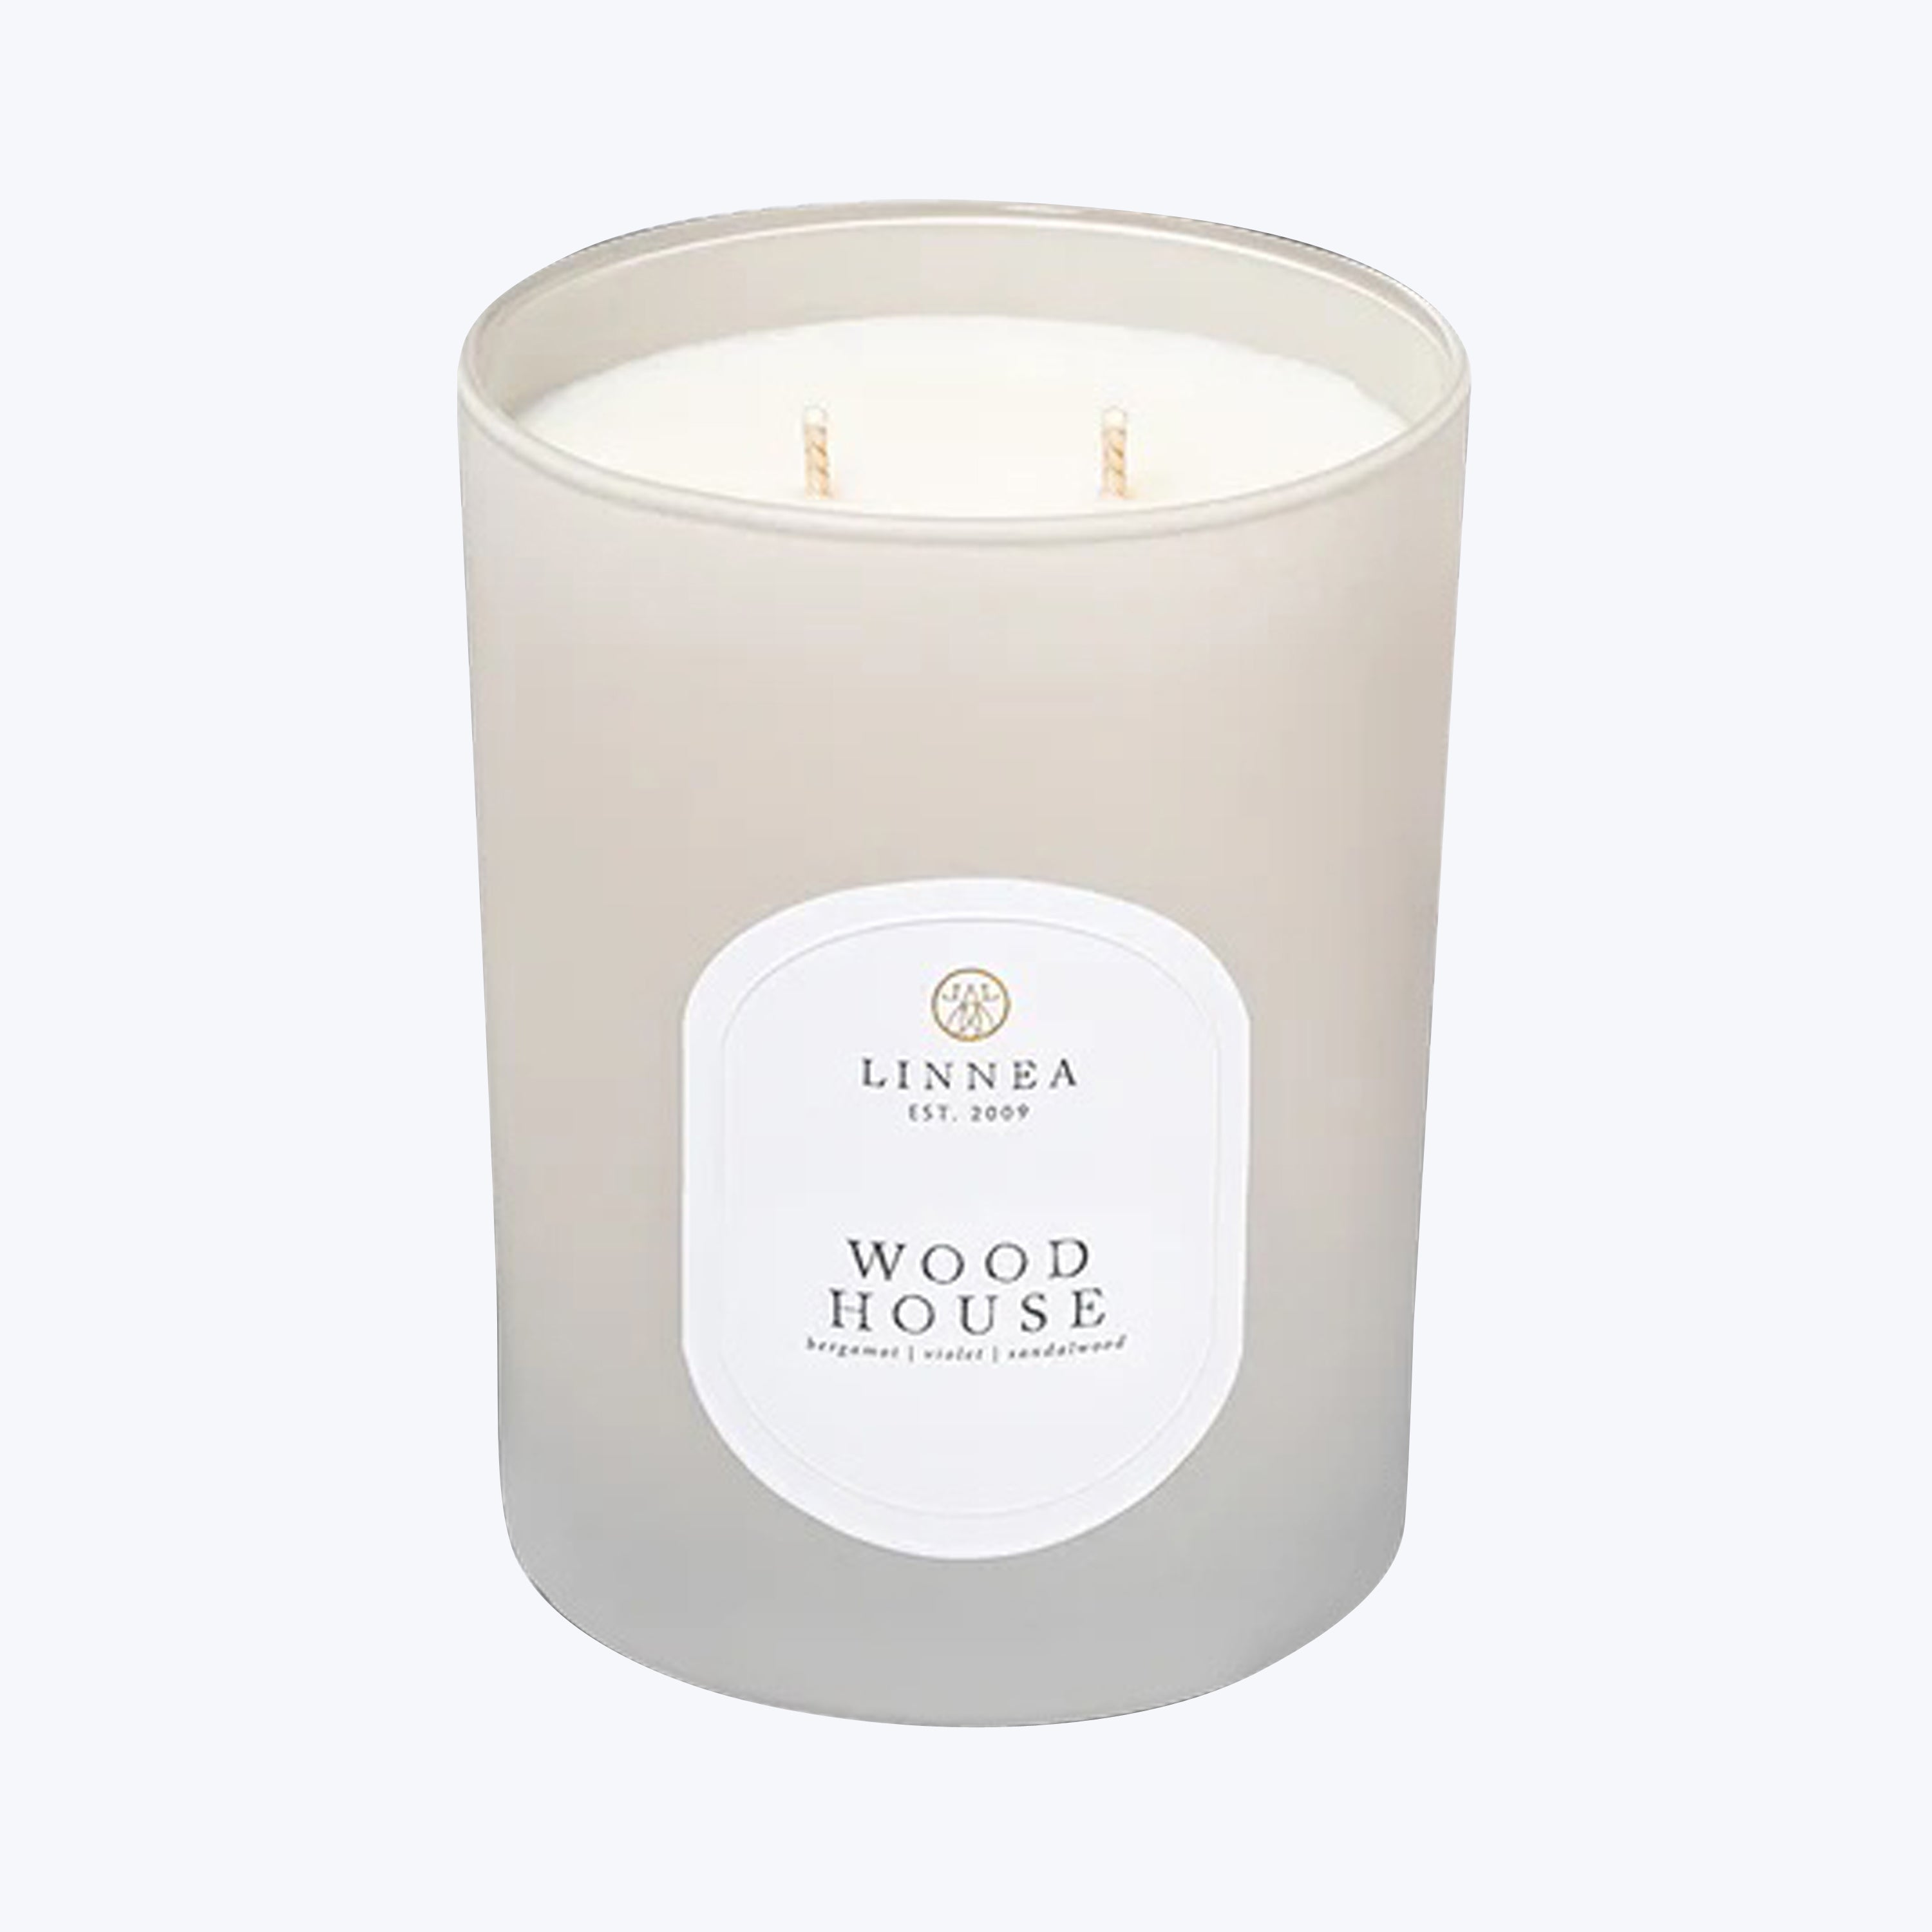 Wood House Candle